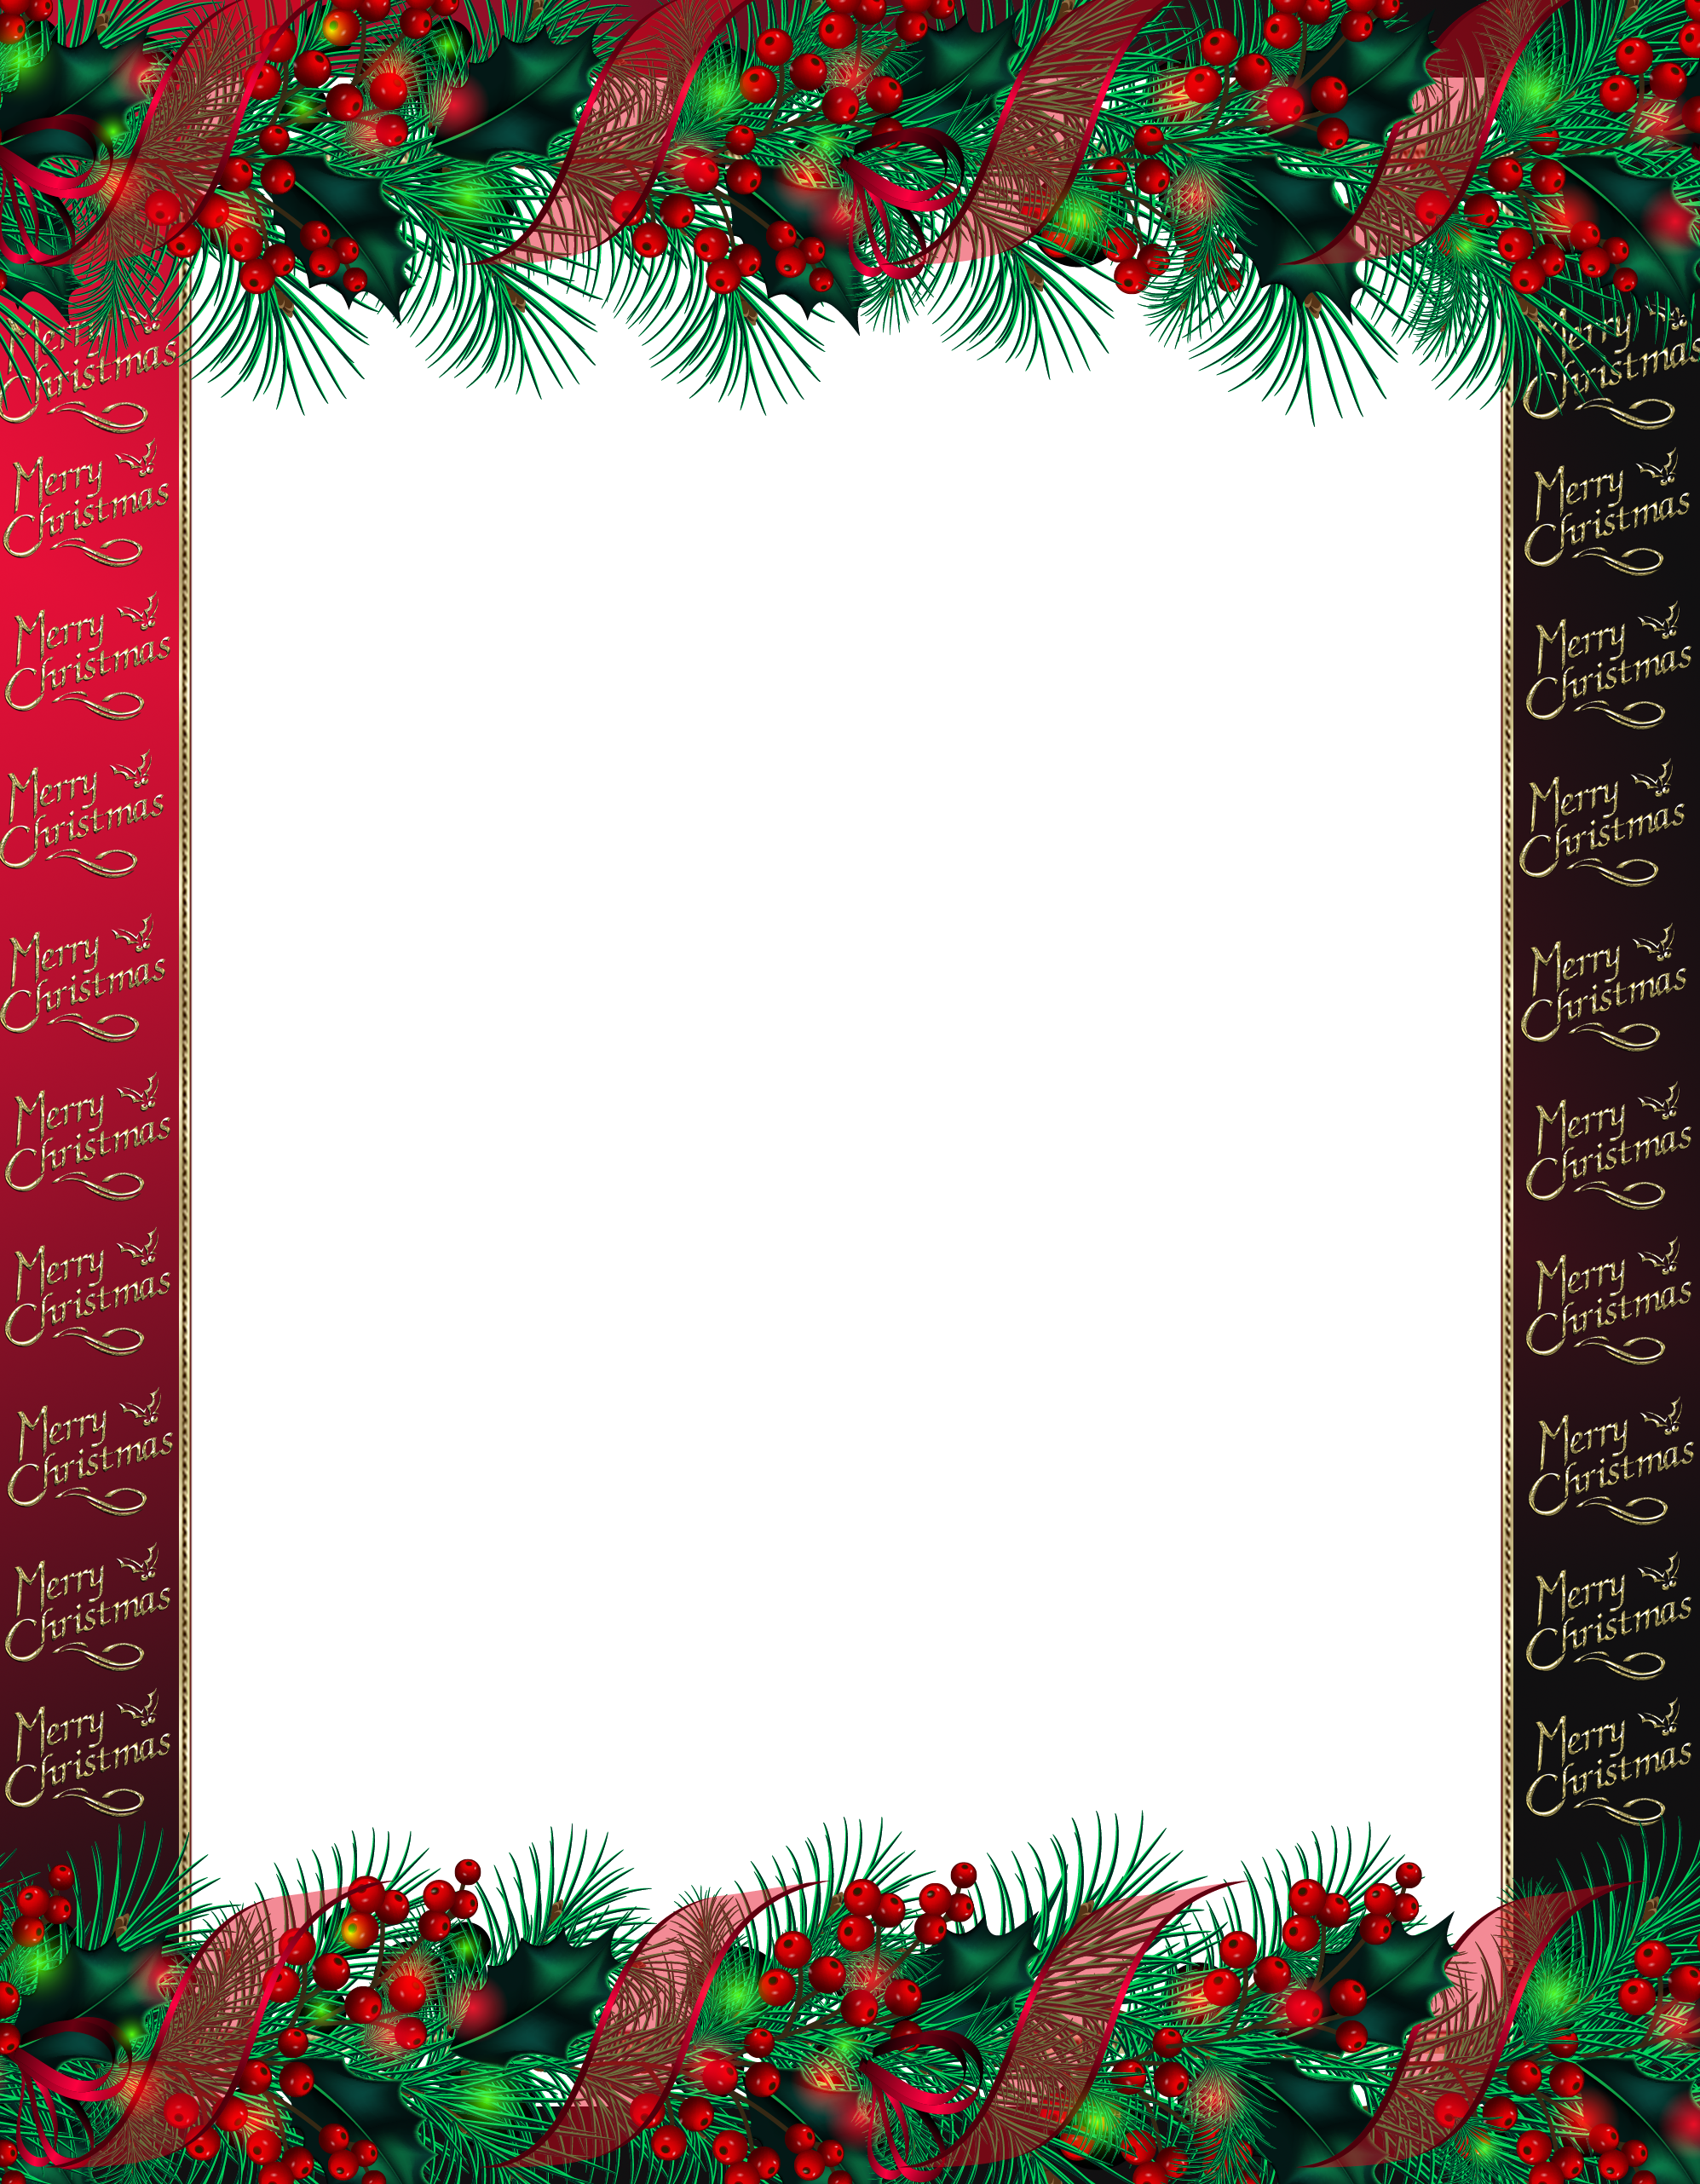 Download PNG image - Red Christmas Frame PNG Pic 